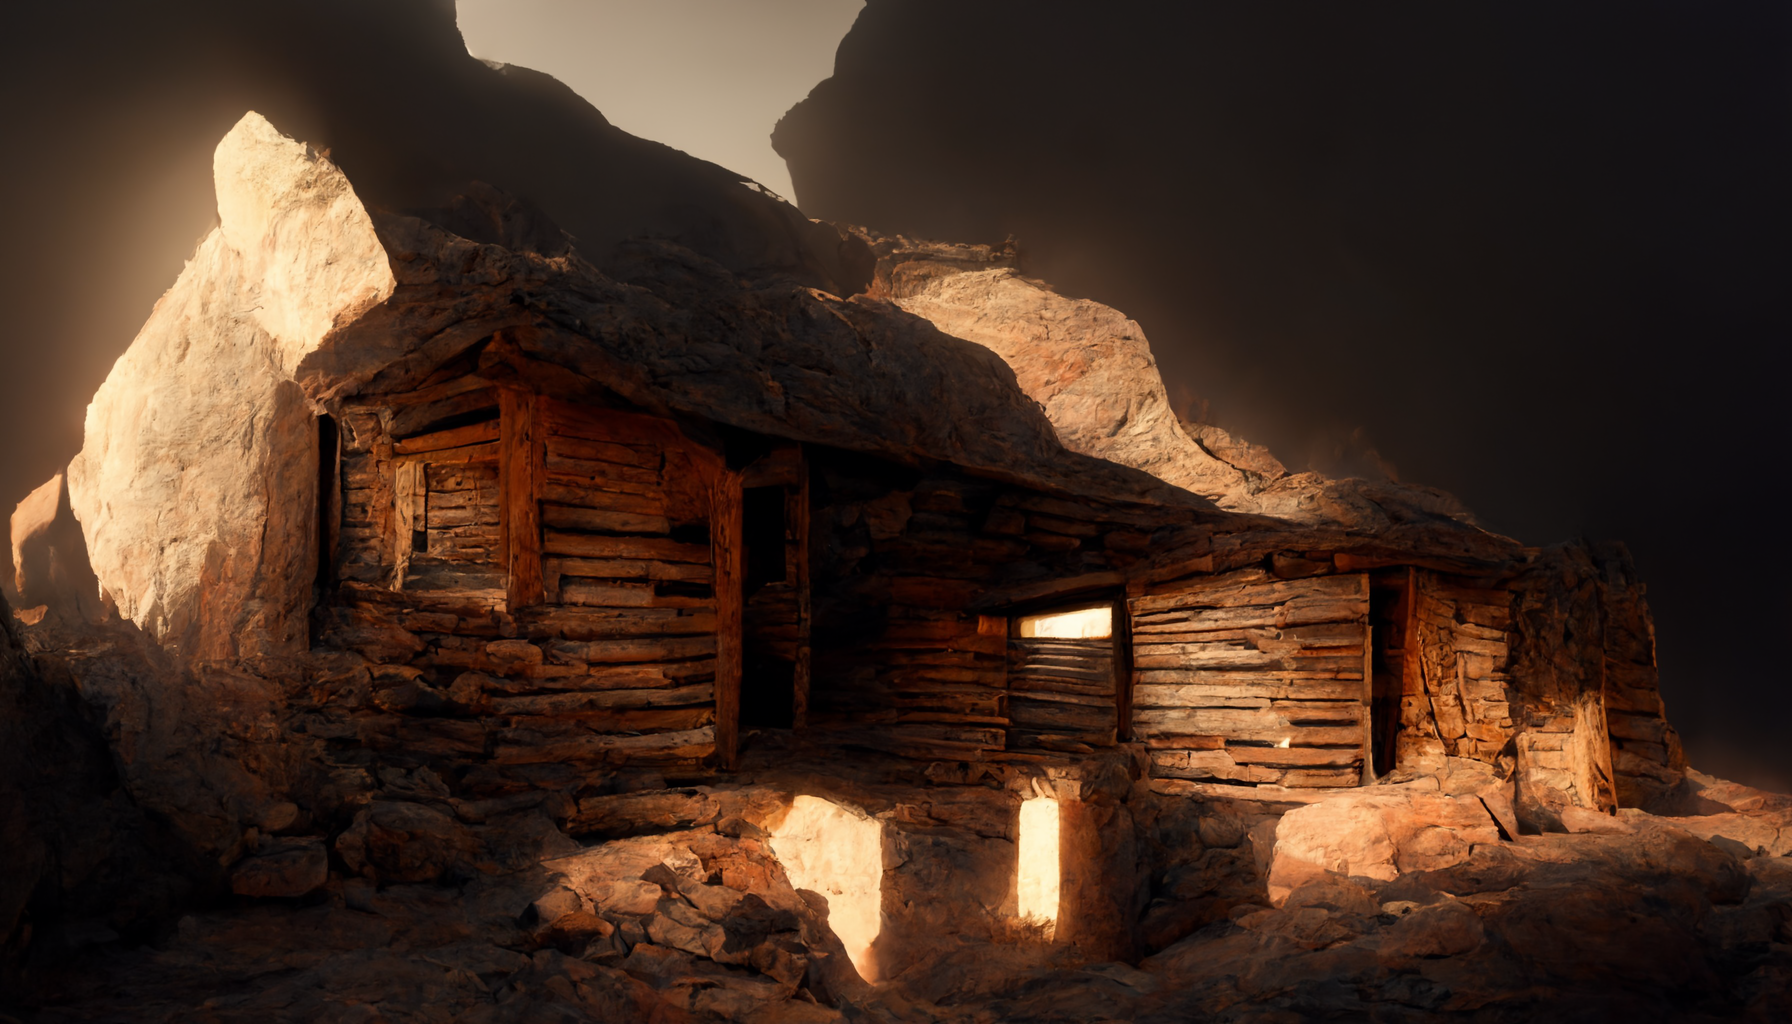 Displaying a file named Grunderwear_united_states_1880_old_miners_cabin_ebedded_in_moun_42722a70-9d03-4f95-950b-efed7e03fd4e.png